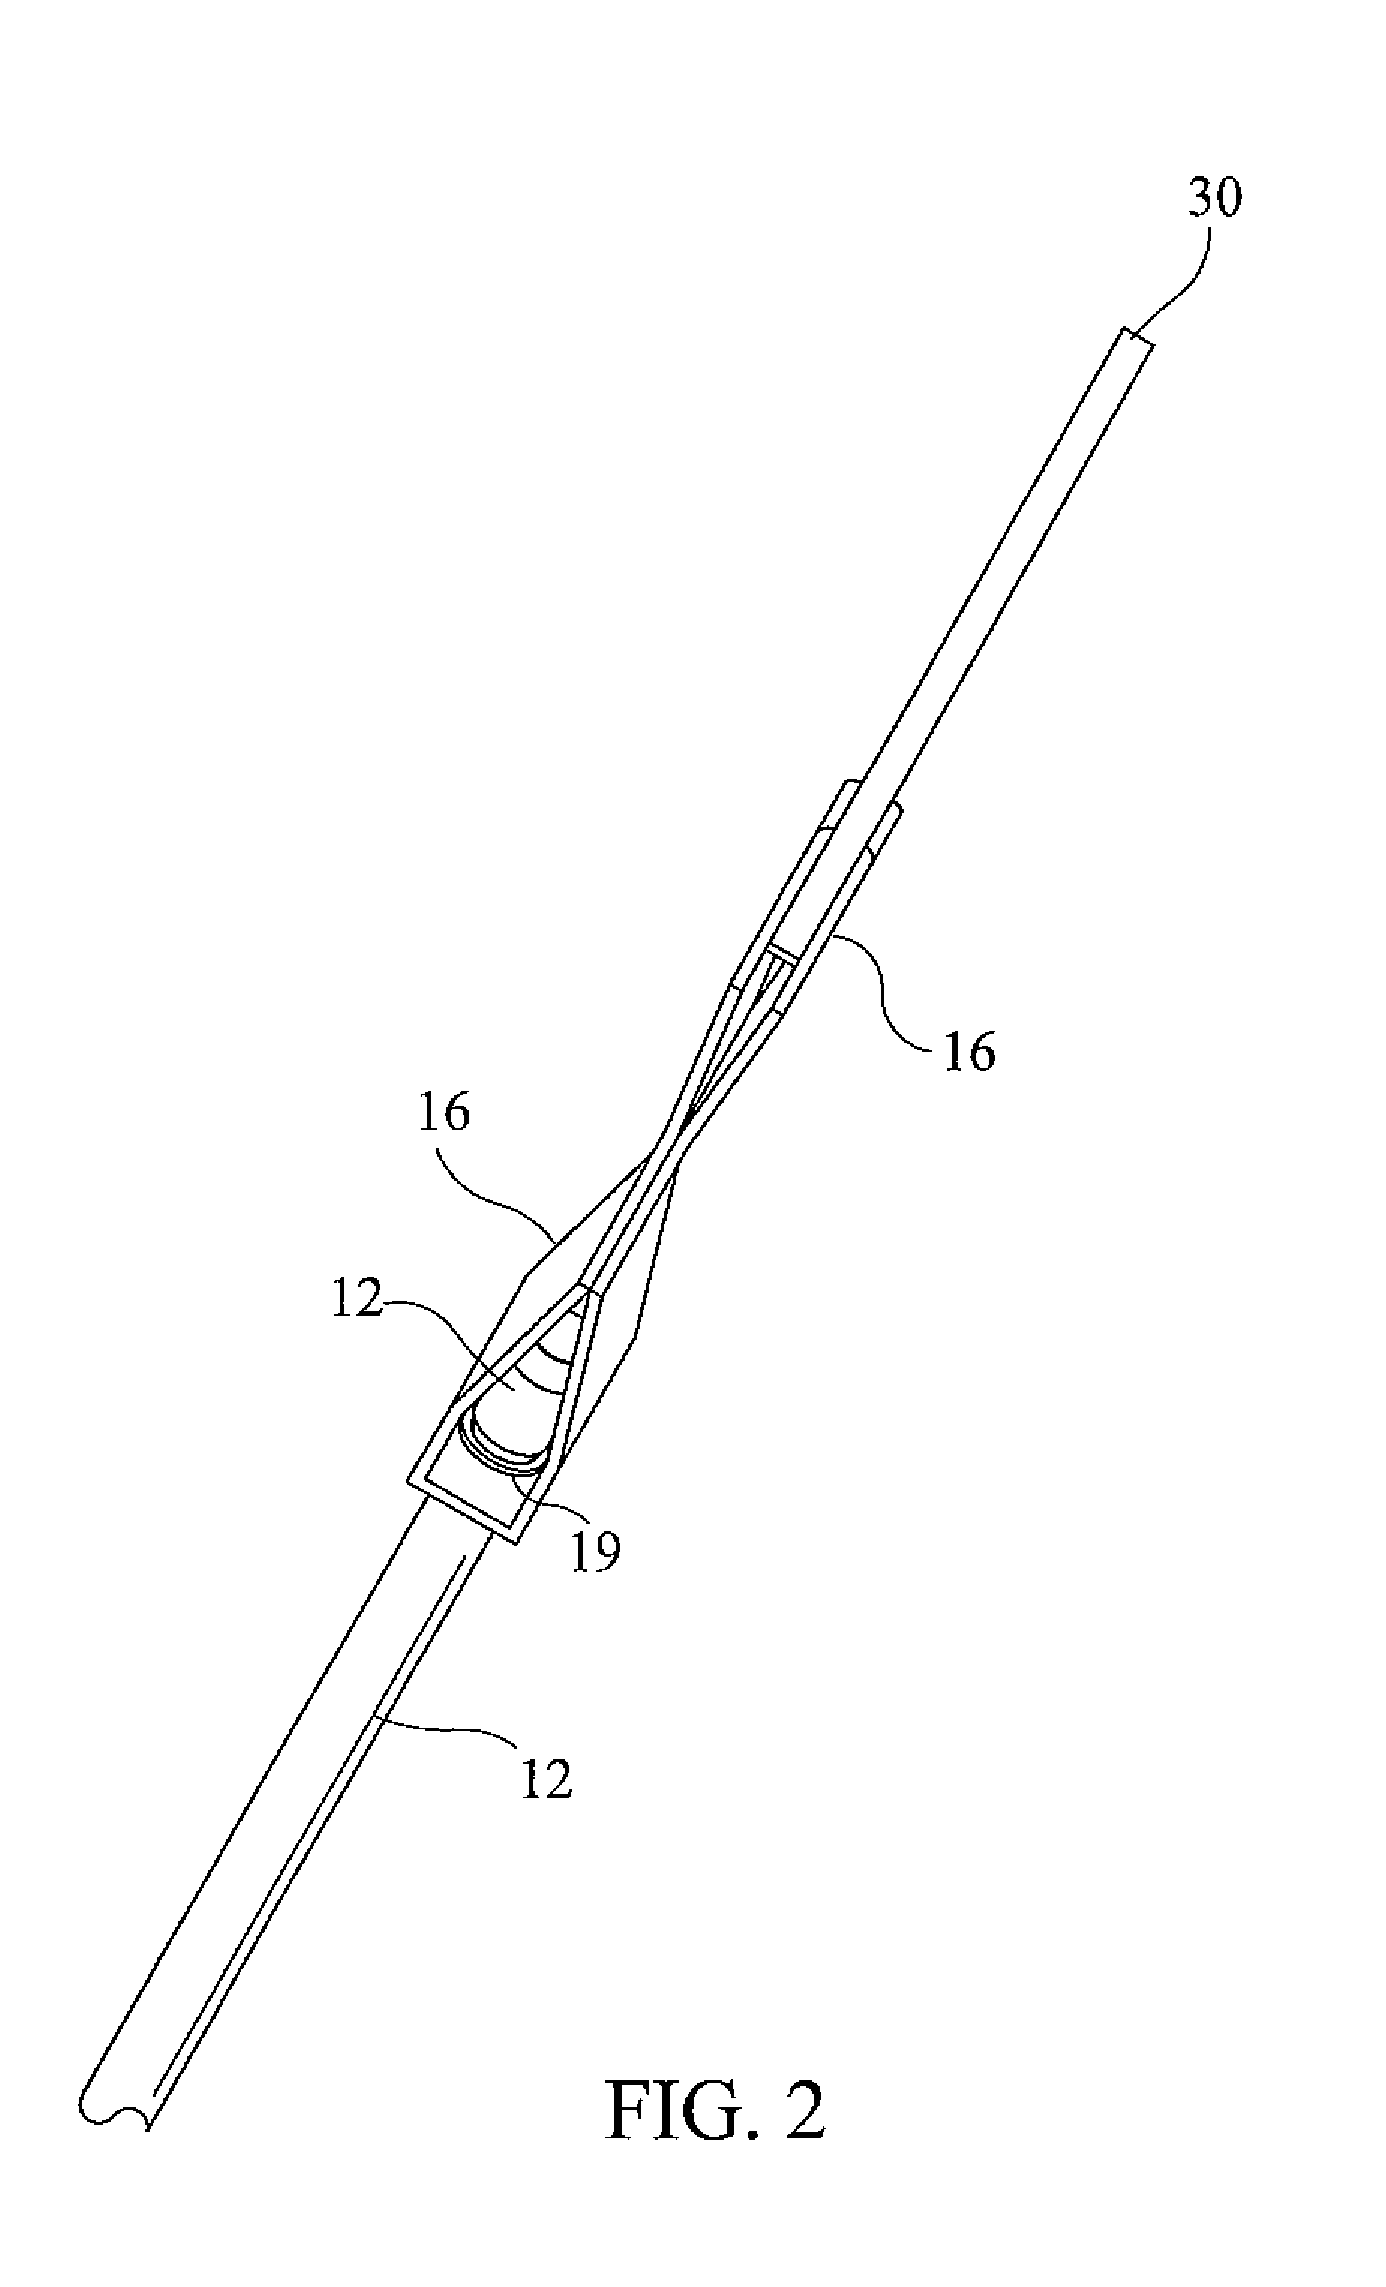 Resistance training exercise device, system and method